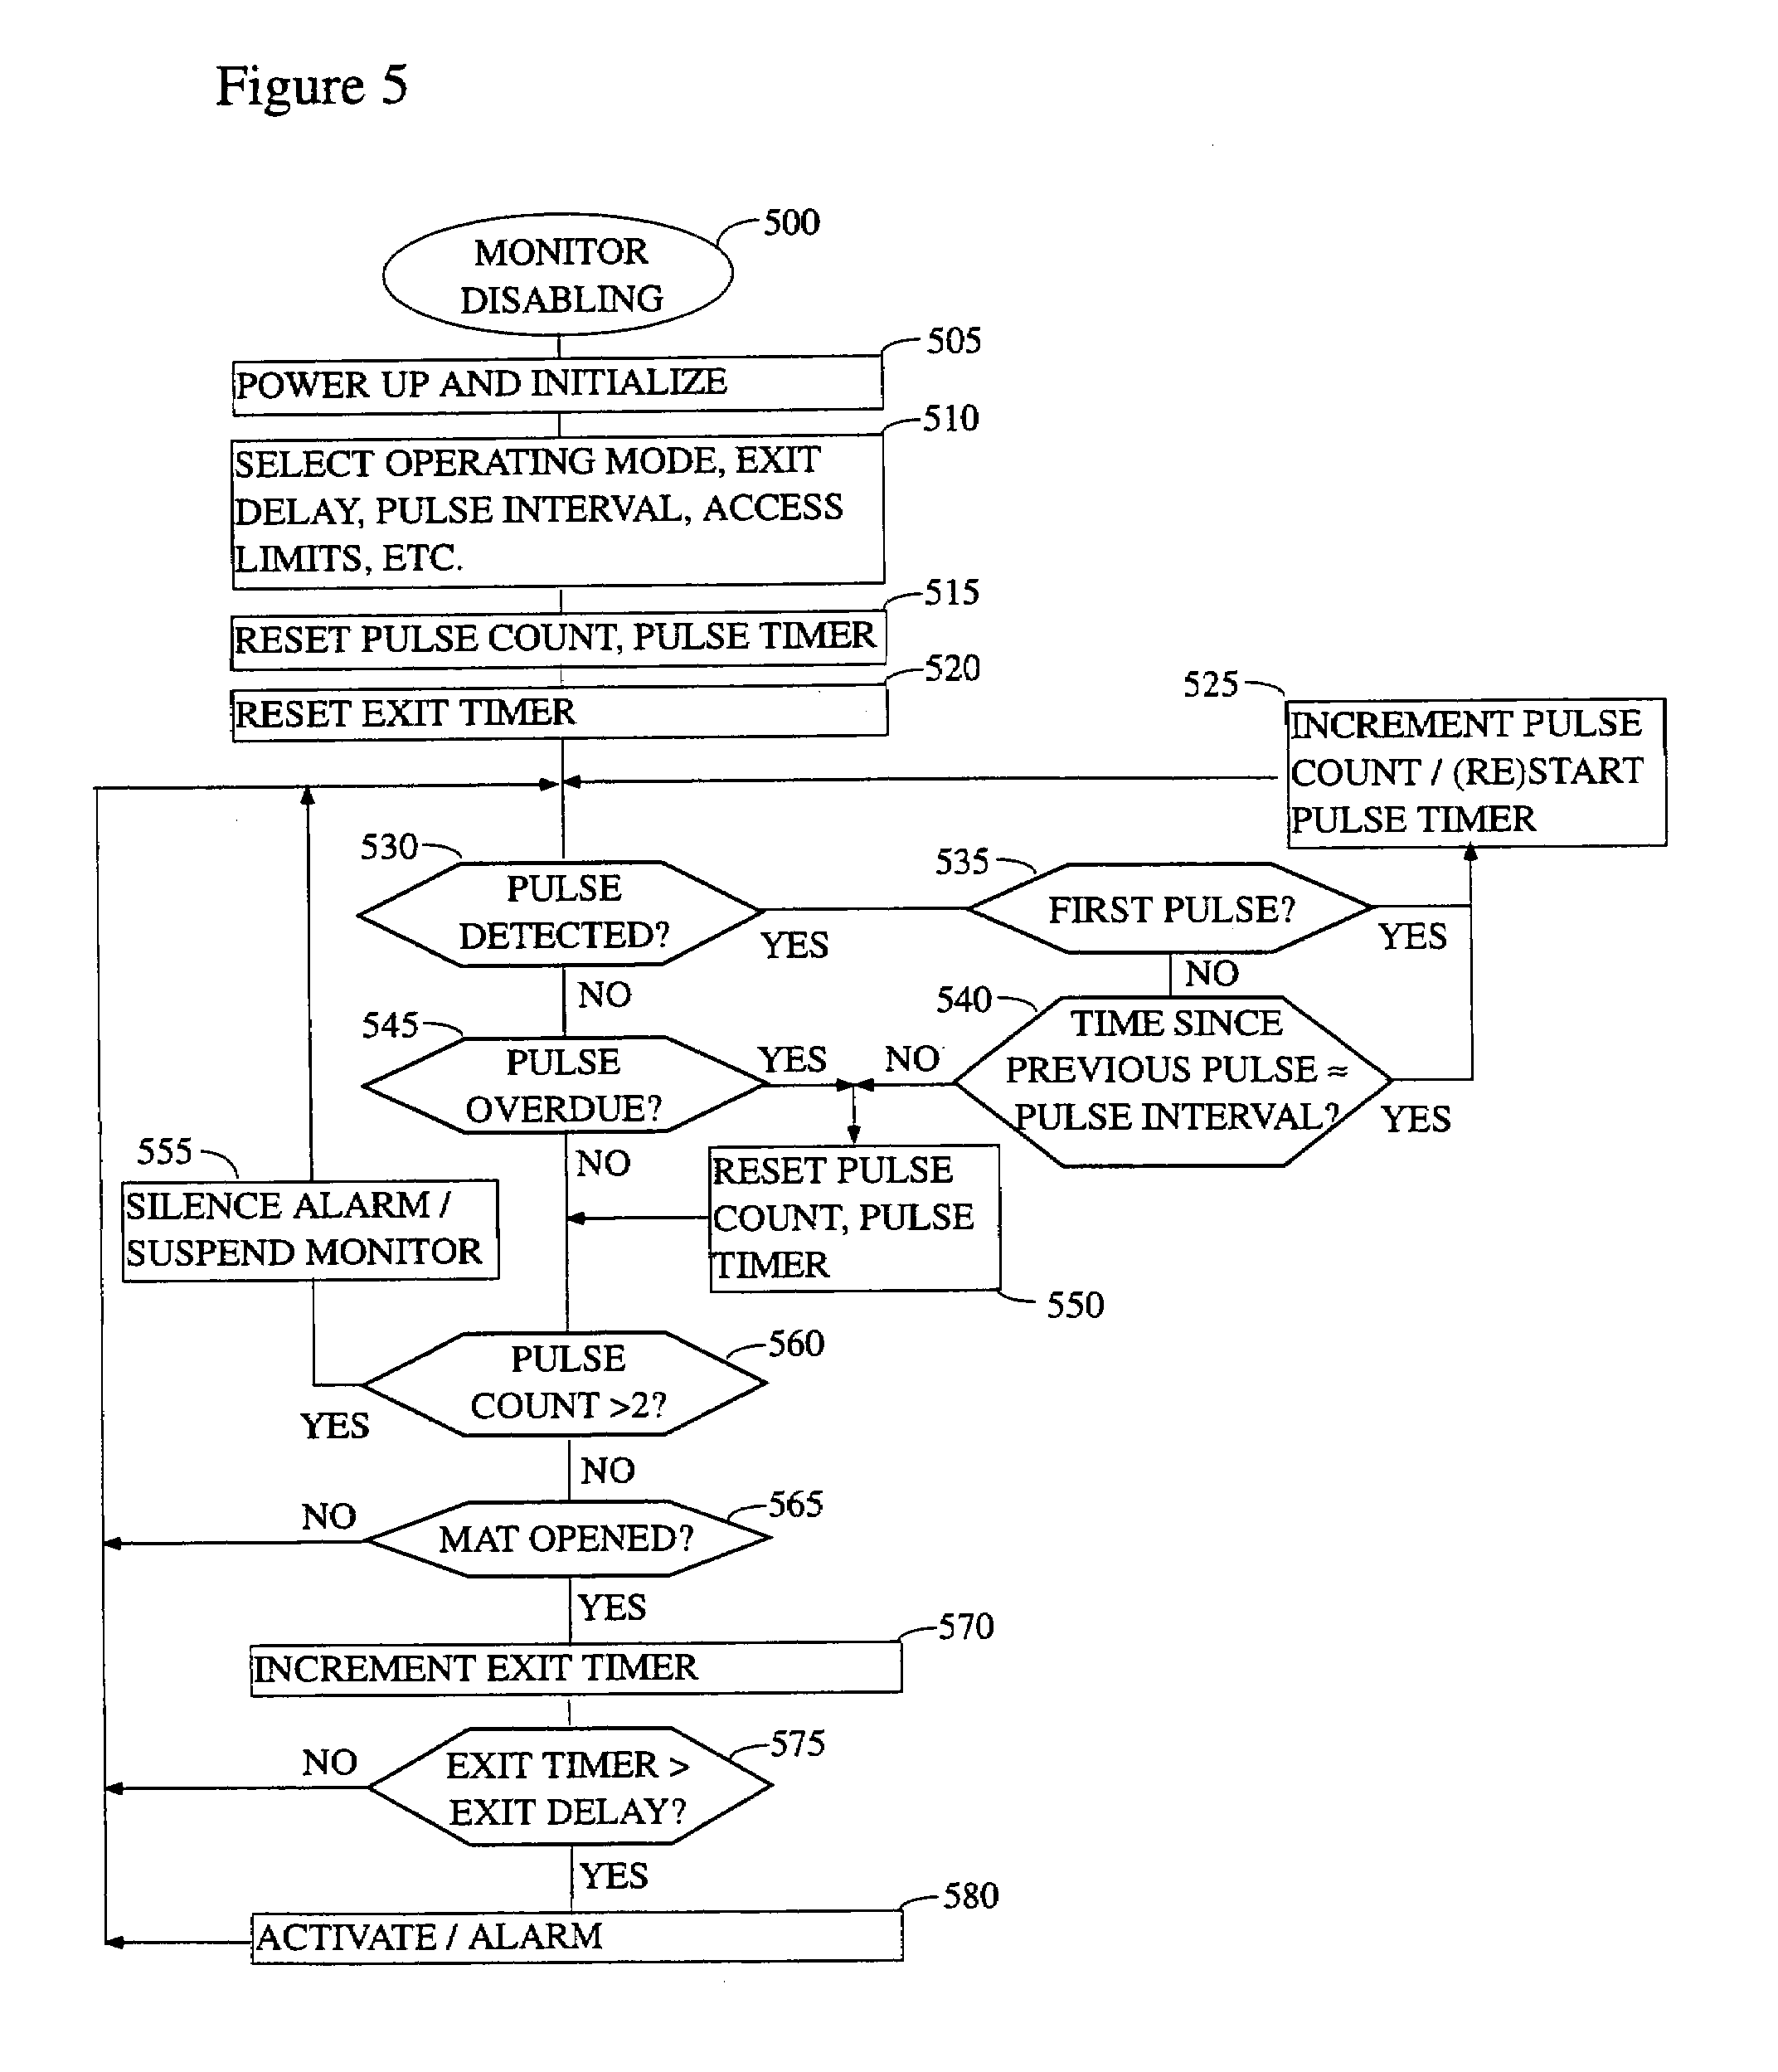 Method and apparatus for temporarily disabling a patient monitor